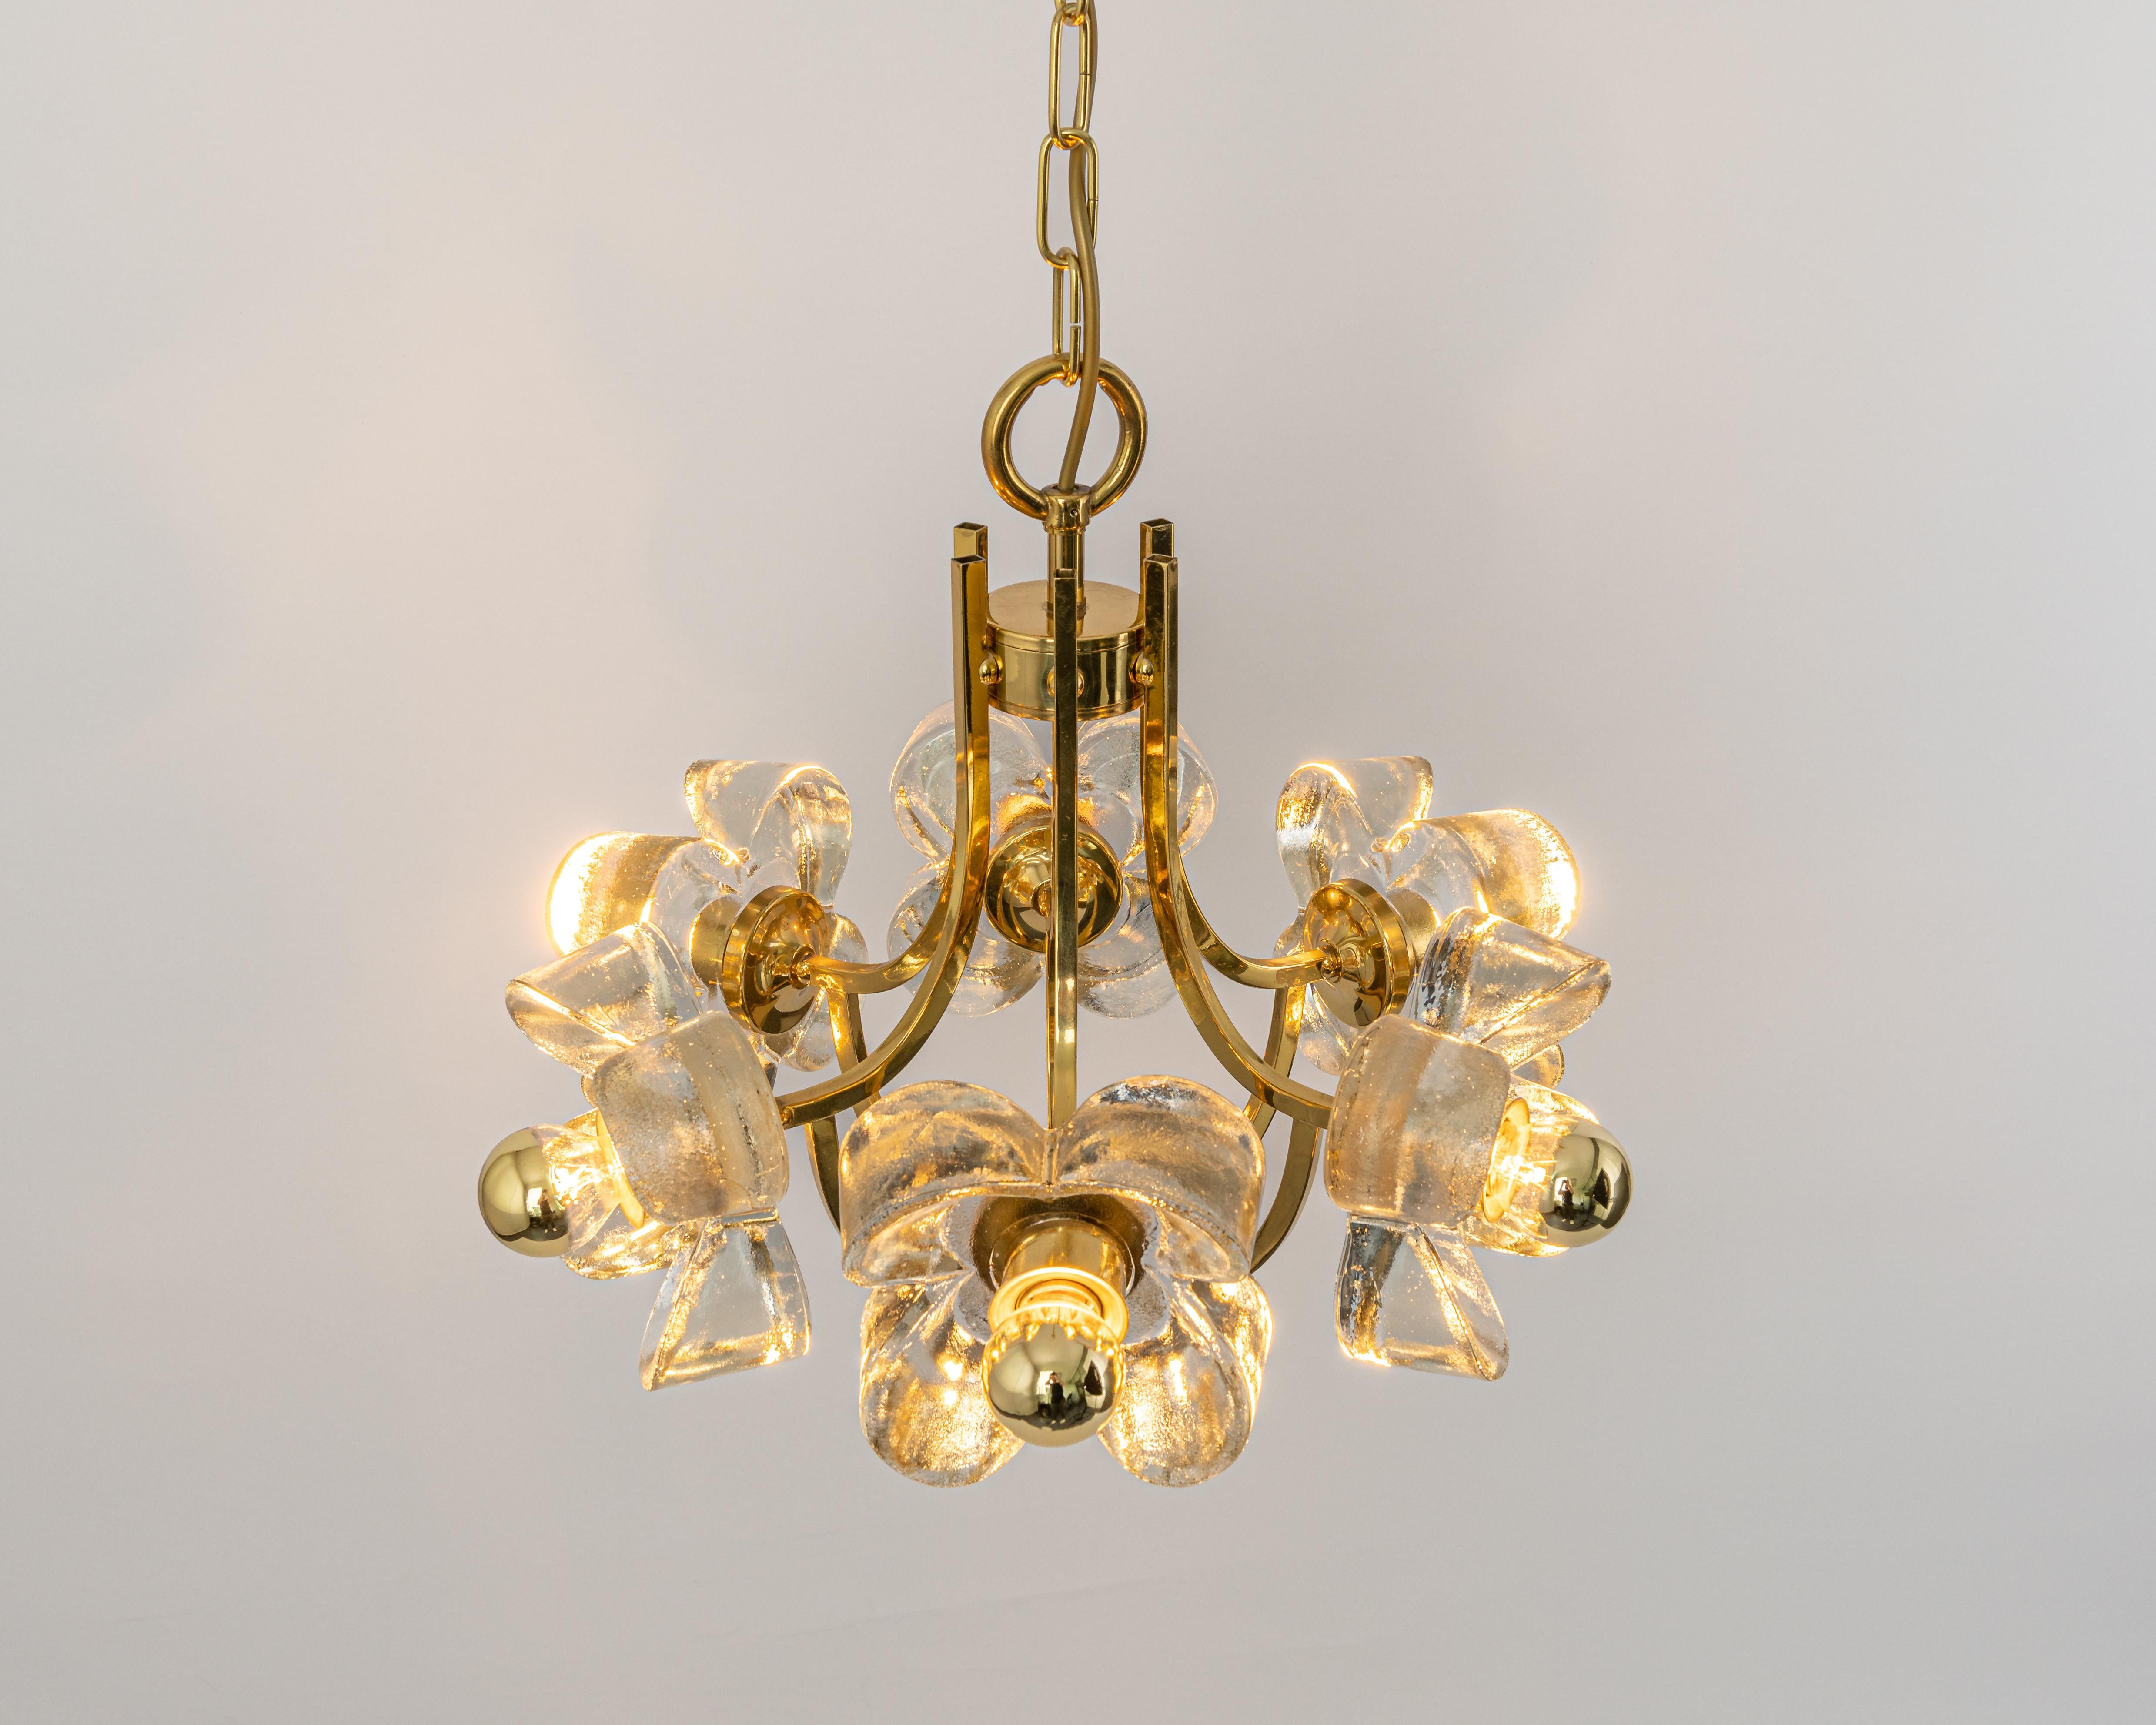 1 of 2 Large Brass and Crystal Glass Pendant by Sische, Germany, 1970s For Sale 5